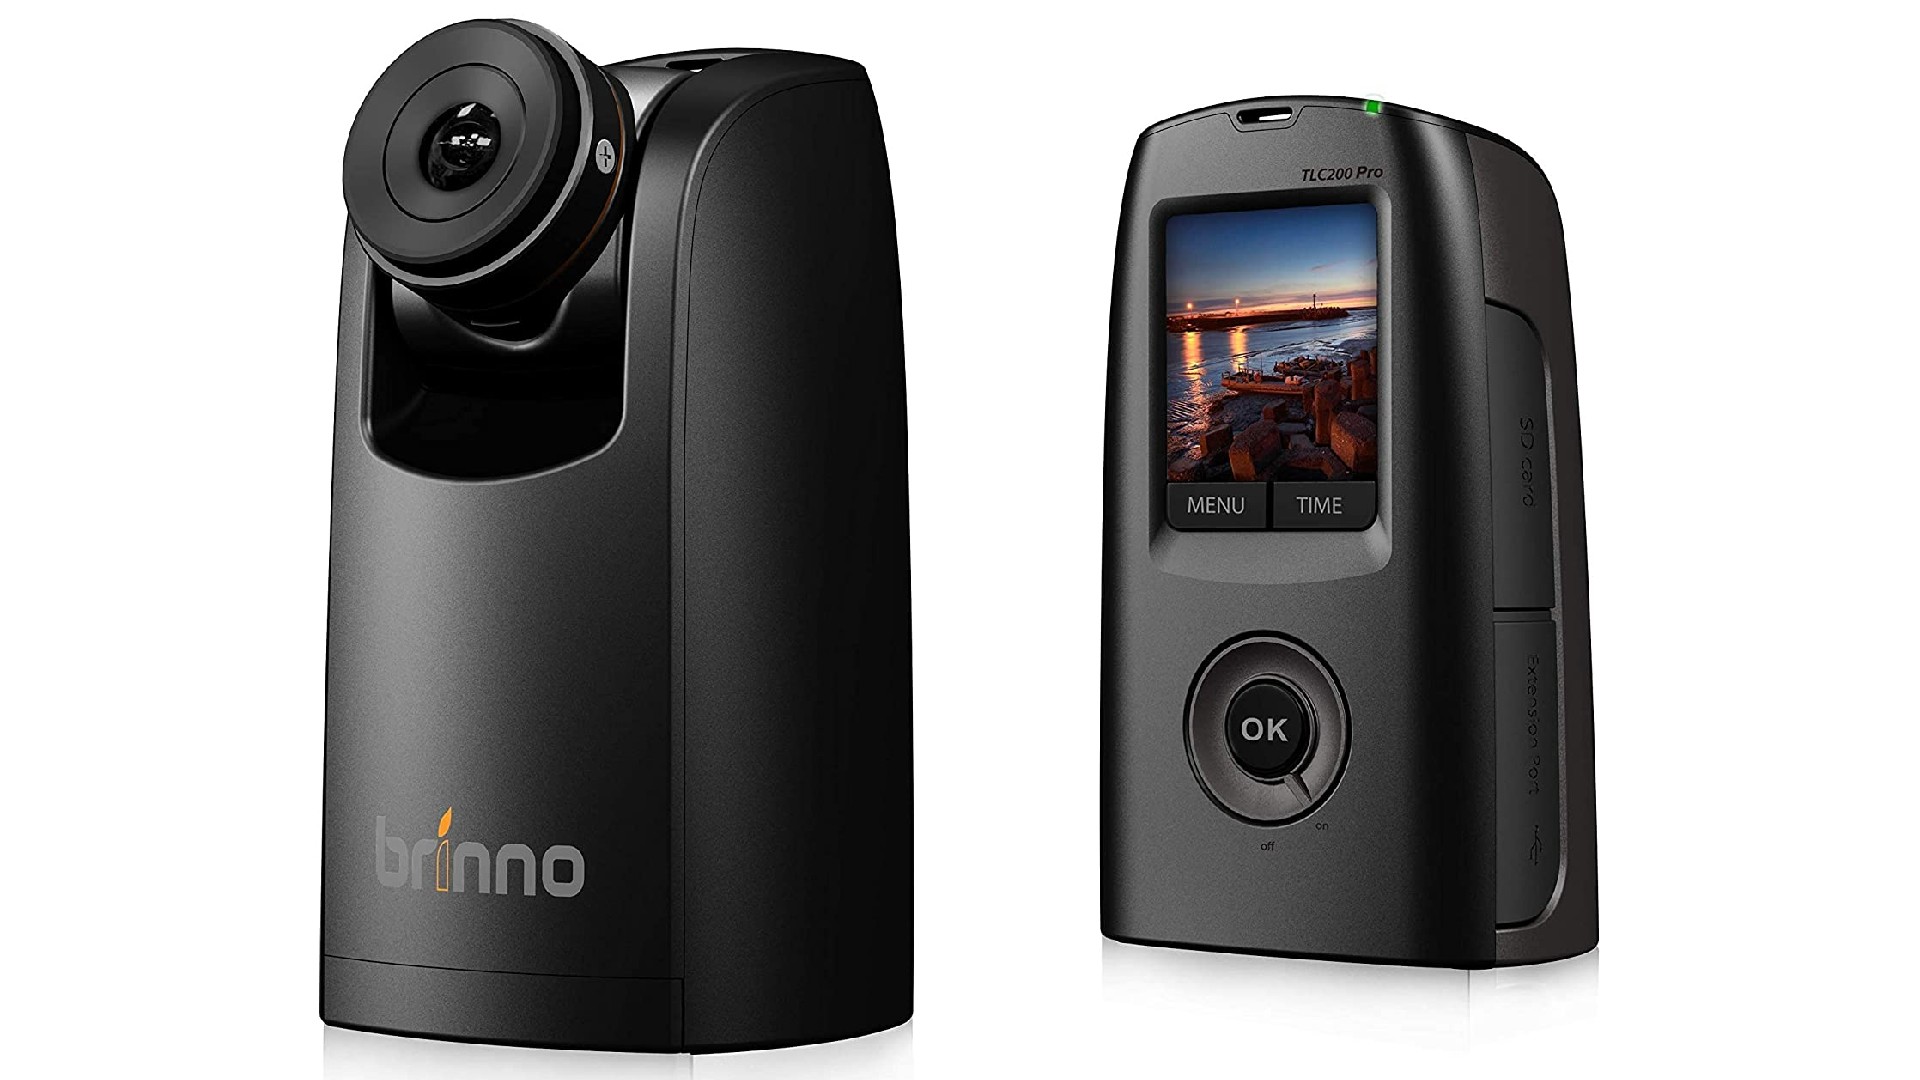 Product shot of Brinno TLC200PRO, one of the best timelapse cameras